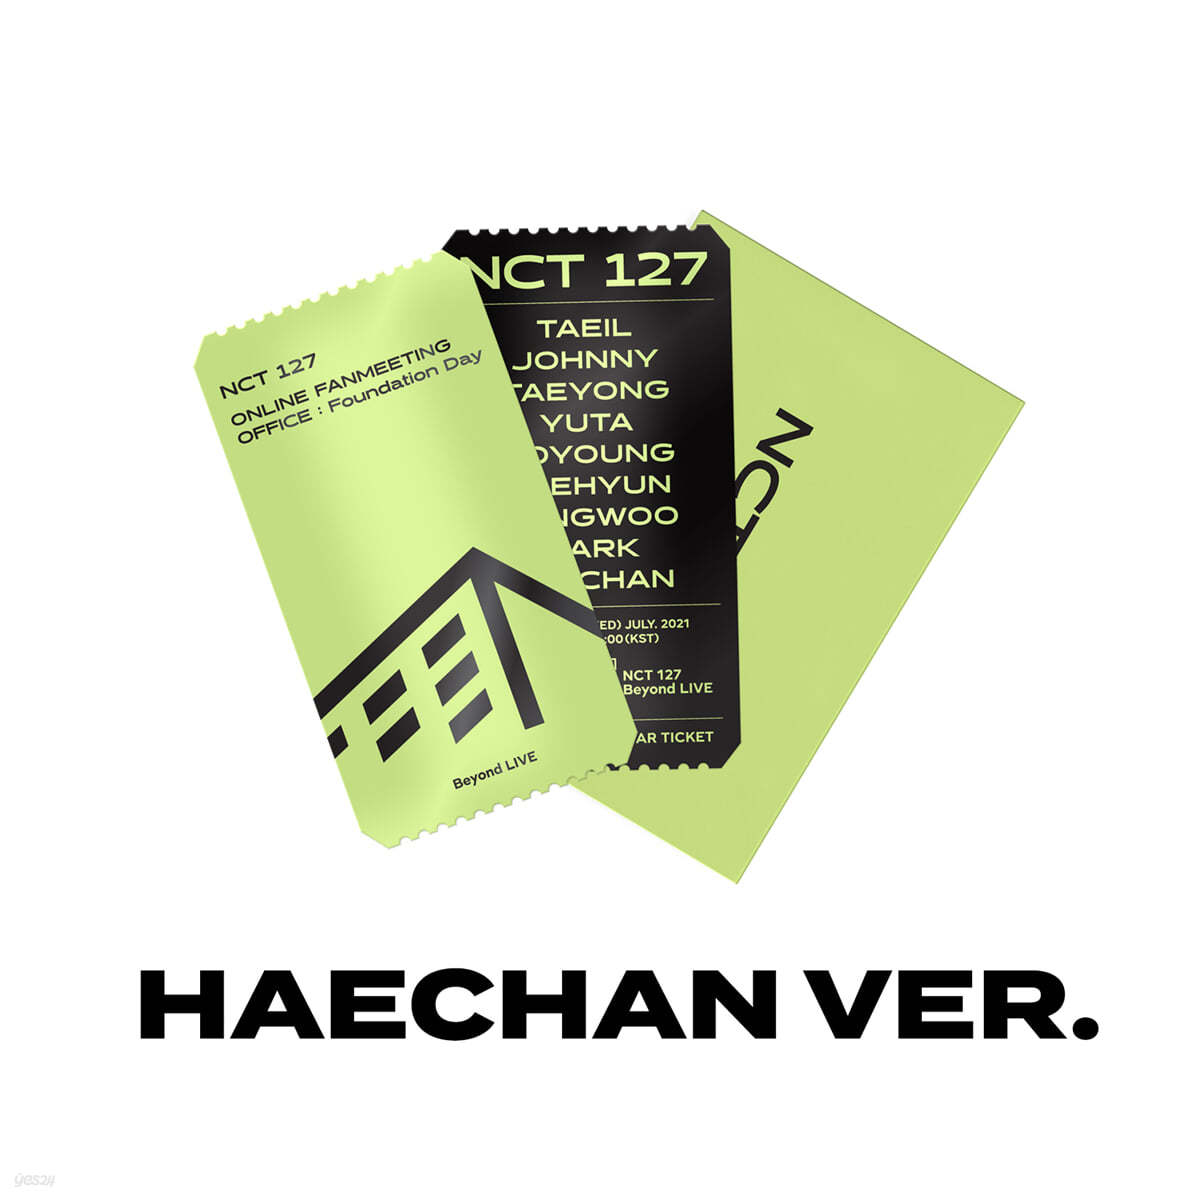 [HAECHAN] SPECIAL AR TICKET SET Beyond LIVE - NCT 127 ONLINE FANMEETING &#39;OFFICE : Foundation Day&#39;